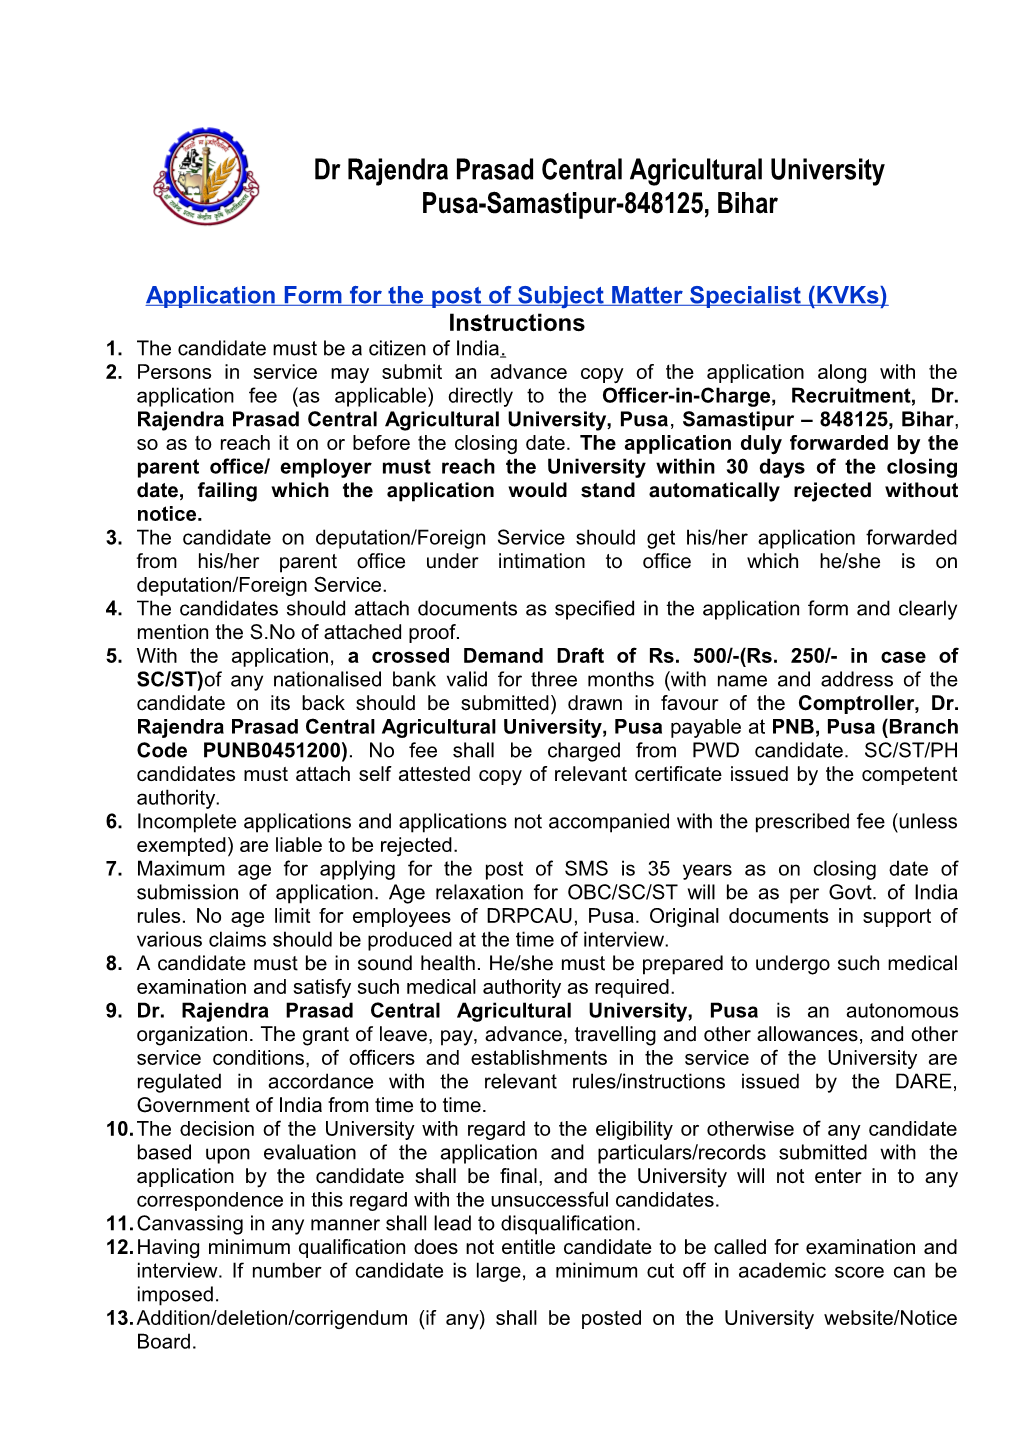 Applicationform for the Post of Subject Matter Specialist (Kvks)